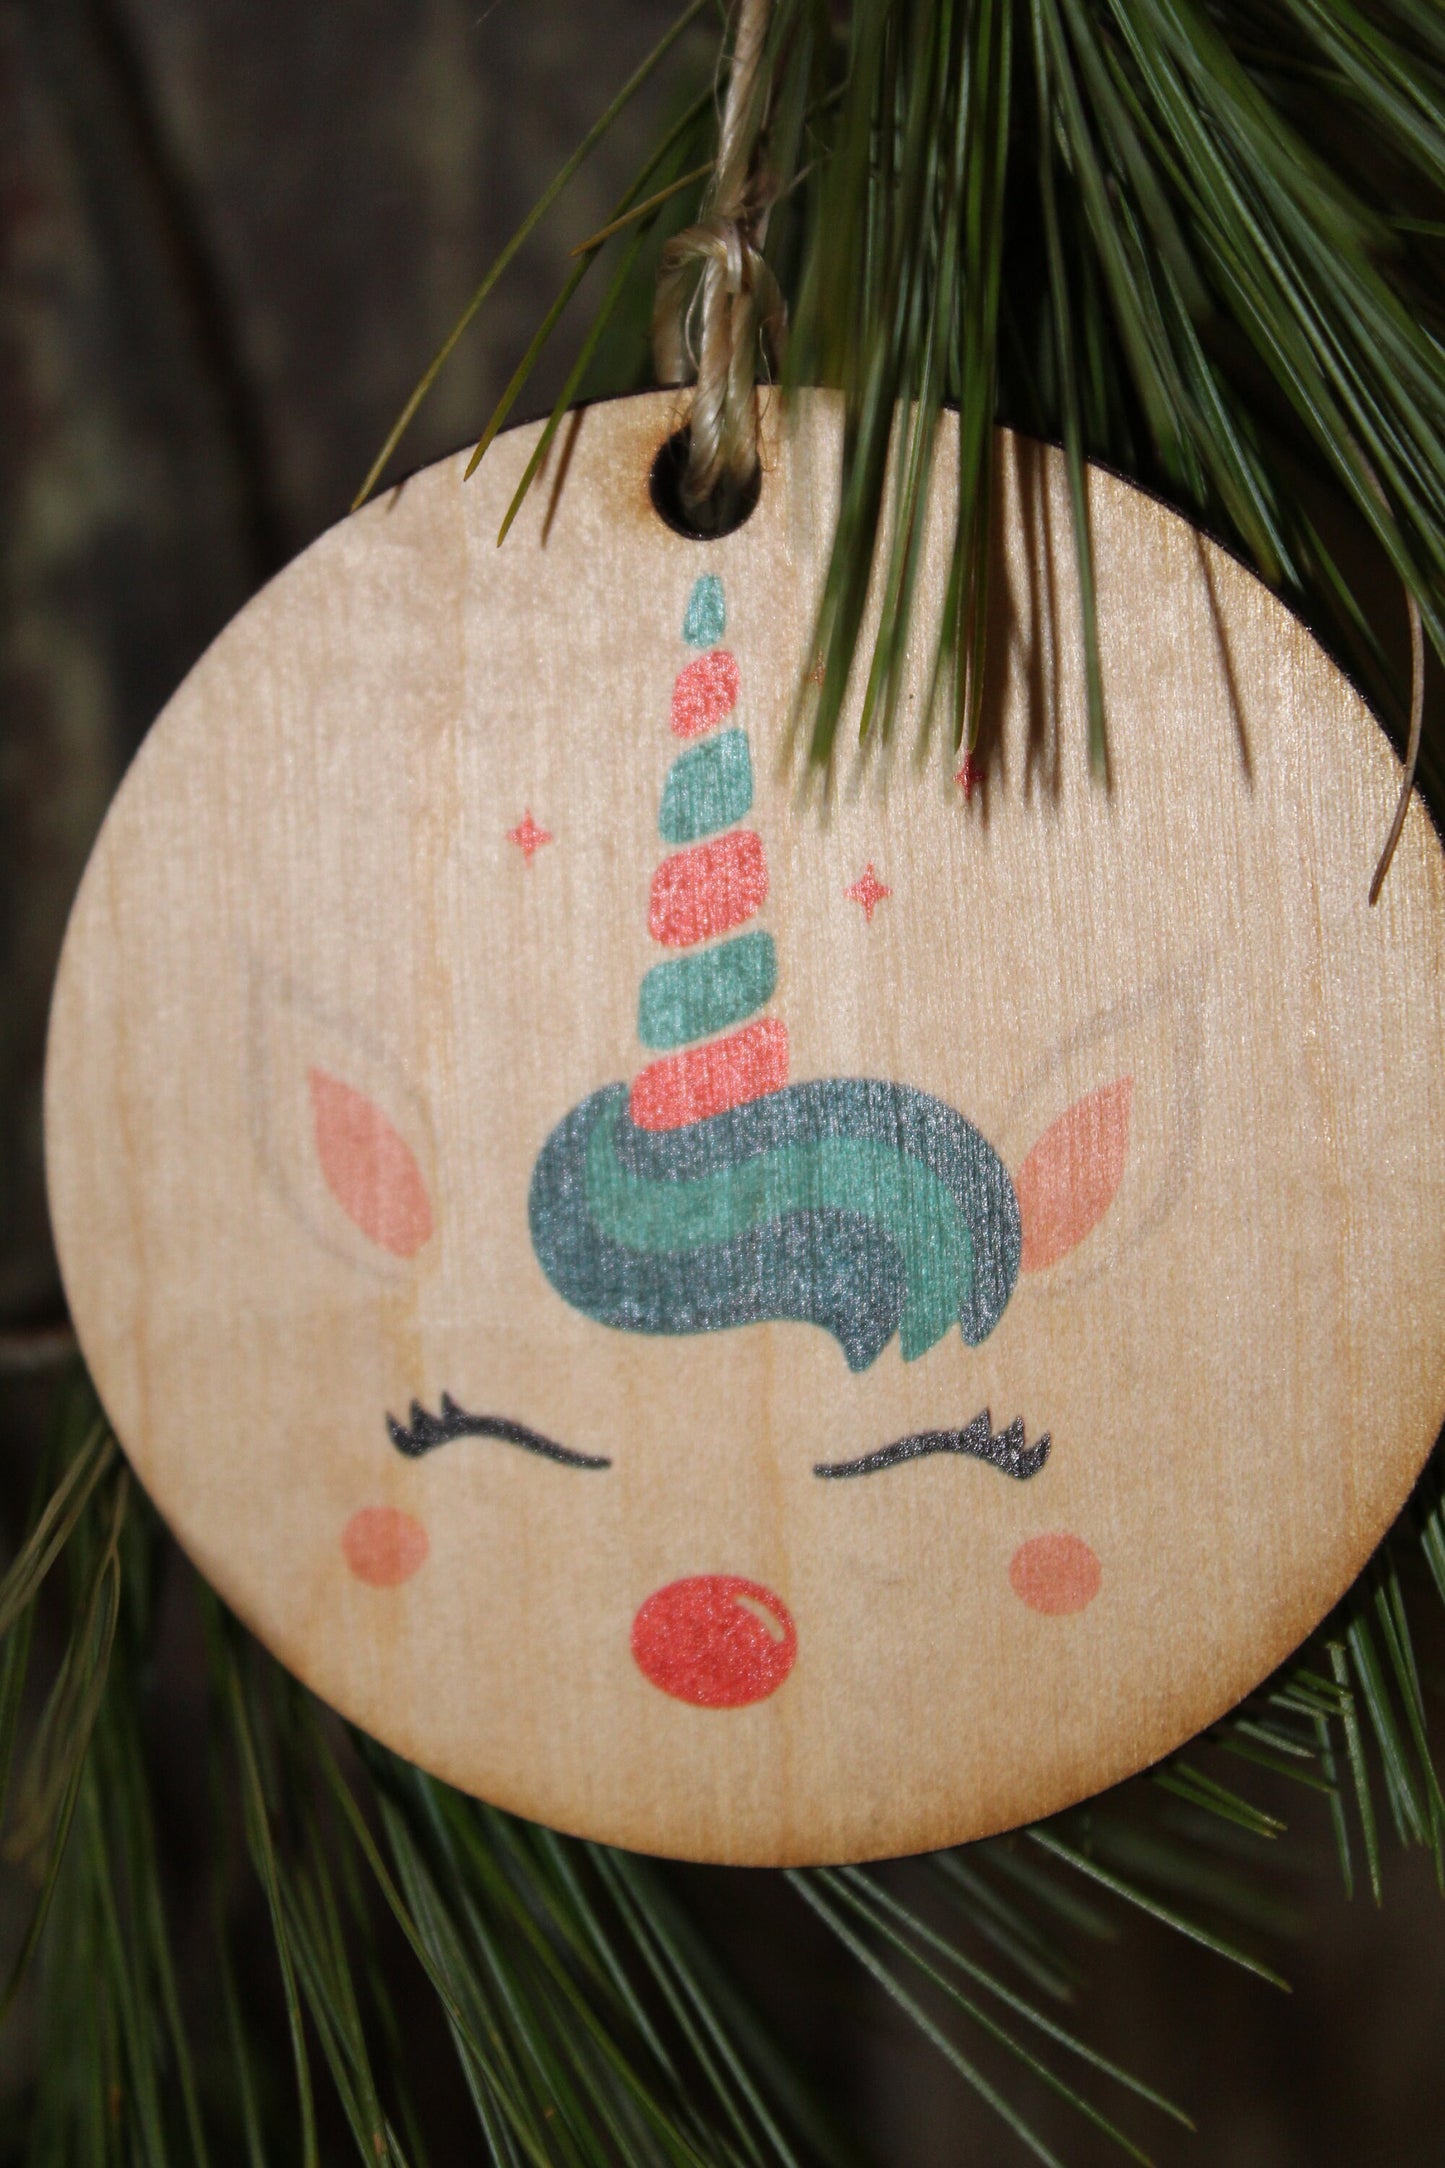 Unicorn Face Ornament Rudolph Red Nose Reindeer Wood Slice Horn Eyelashes Up-close Primitive Christmas Ornament Rustic Tree Printed